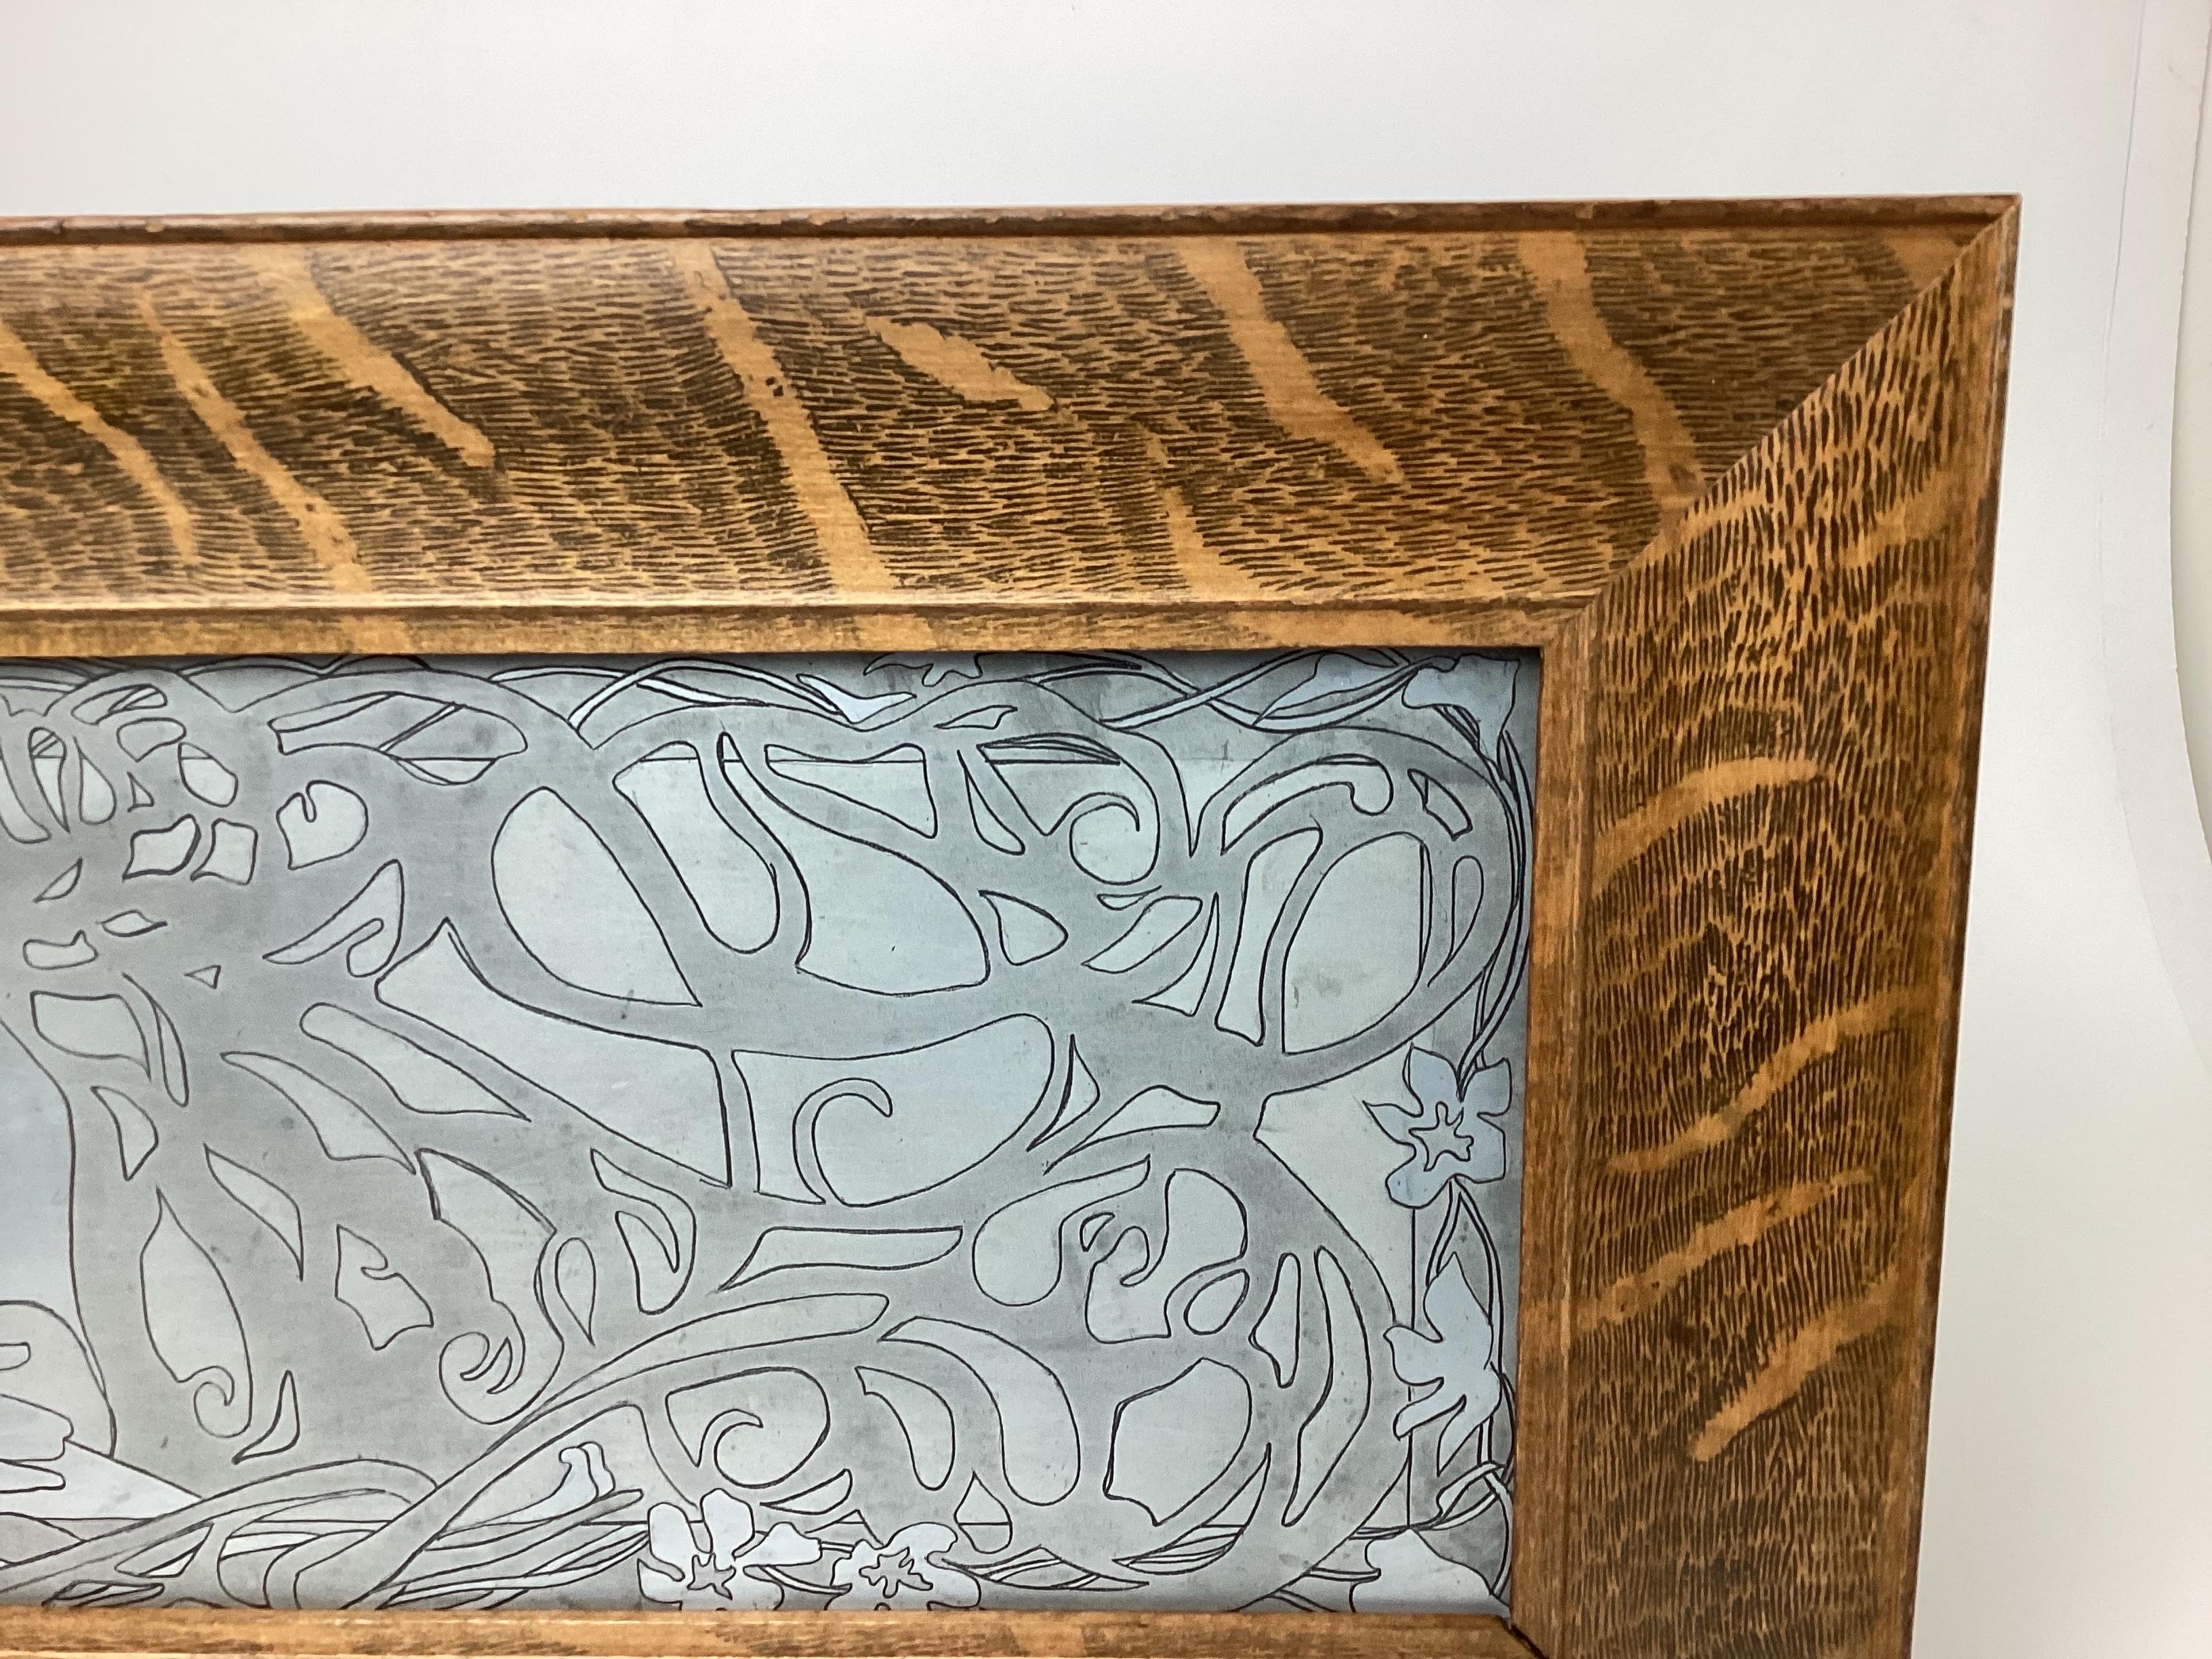 American Art Nouveau Metal Etched Printer Plate in Oak Frame For Sale